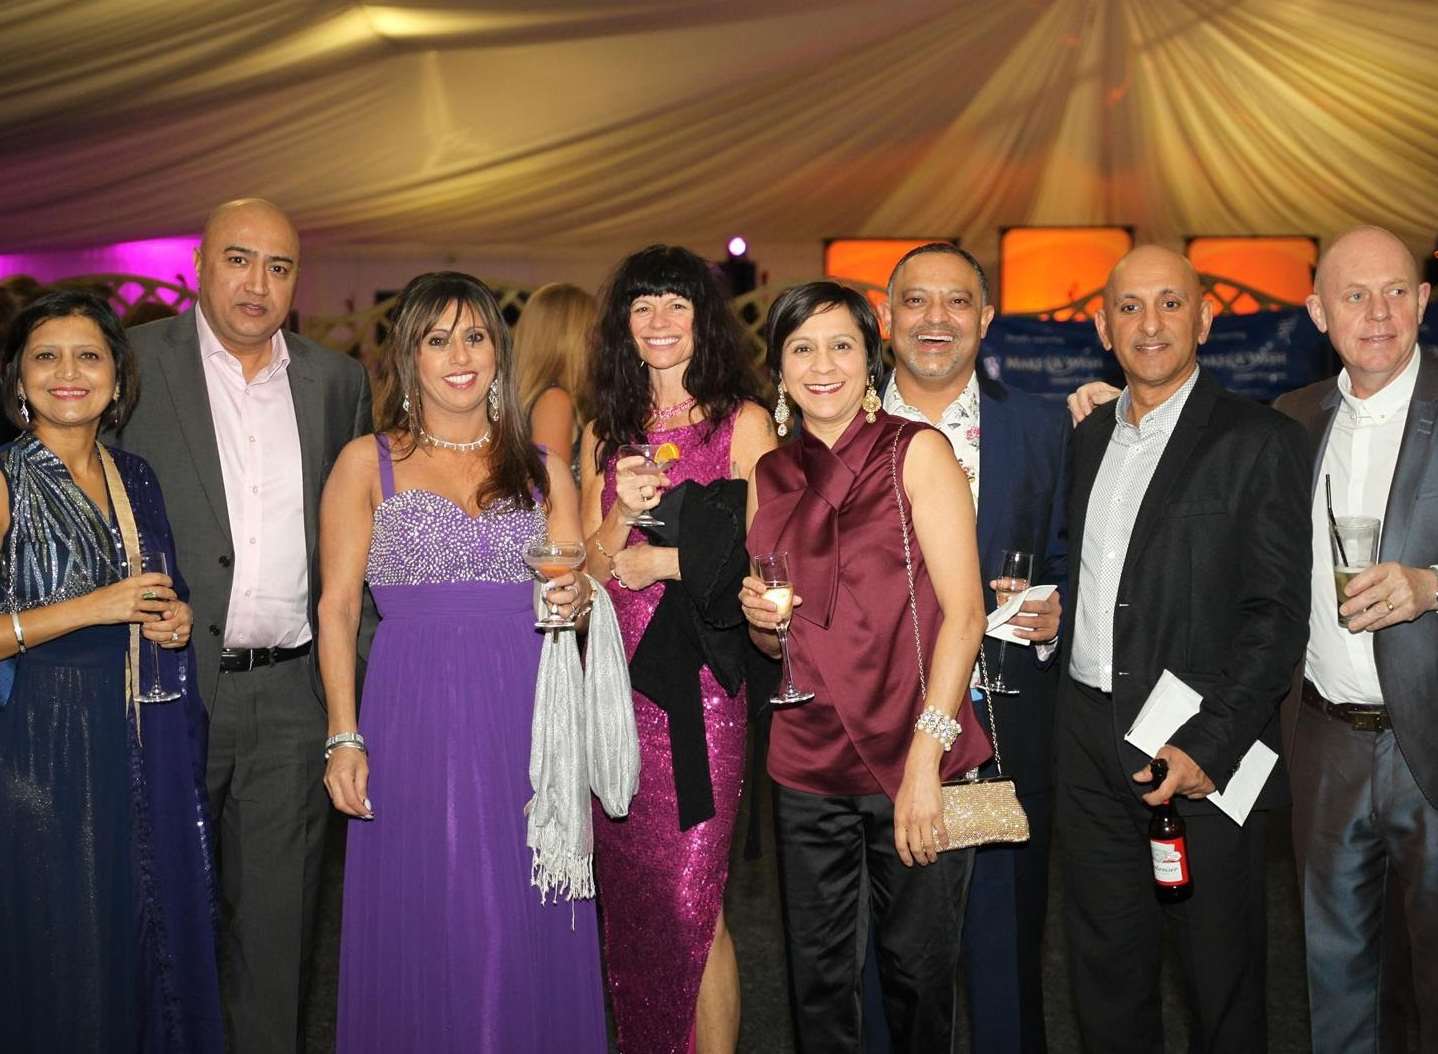 £27,000 was raised at the Remembering Ria charity ball